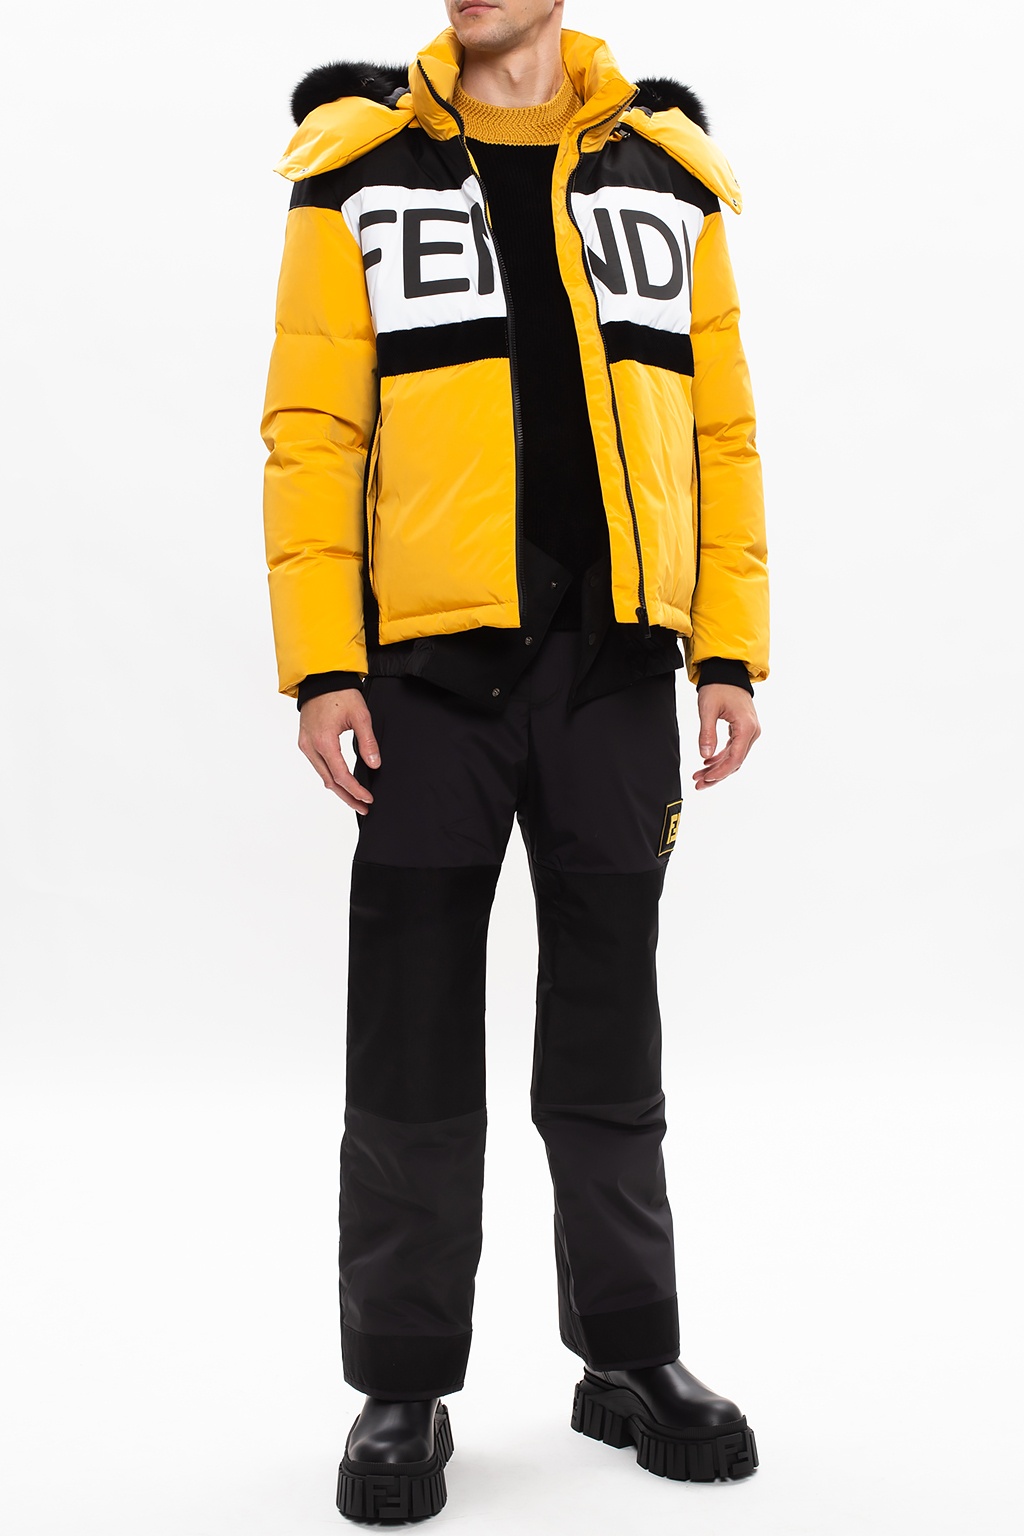 Fendi Releases Its Winter 2021 Skiwear Line  Skiing outfit, Mens ski wear,  Ski outfit men